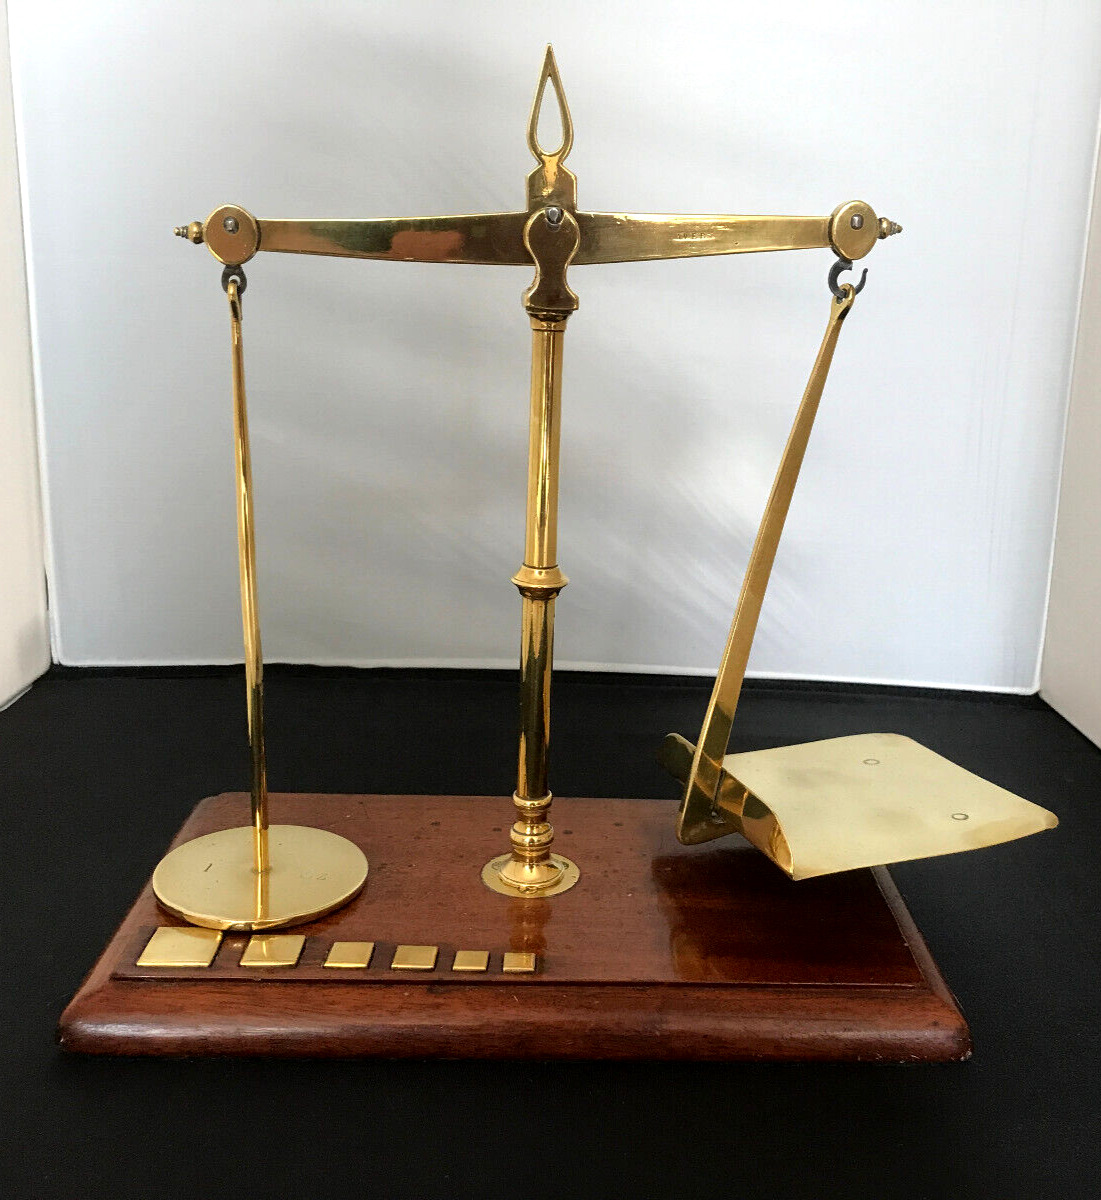 Avery brass post office letter balance scales + weights, oak base, vintage